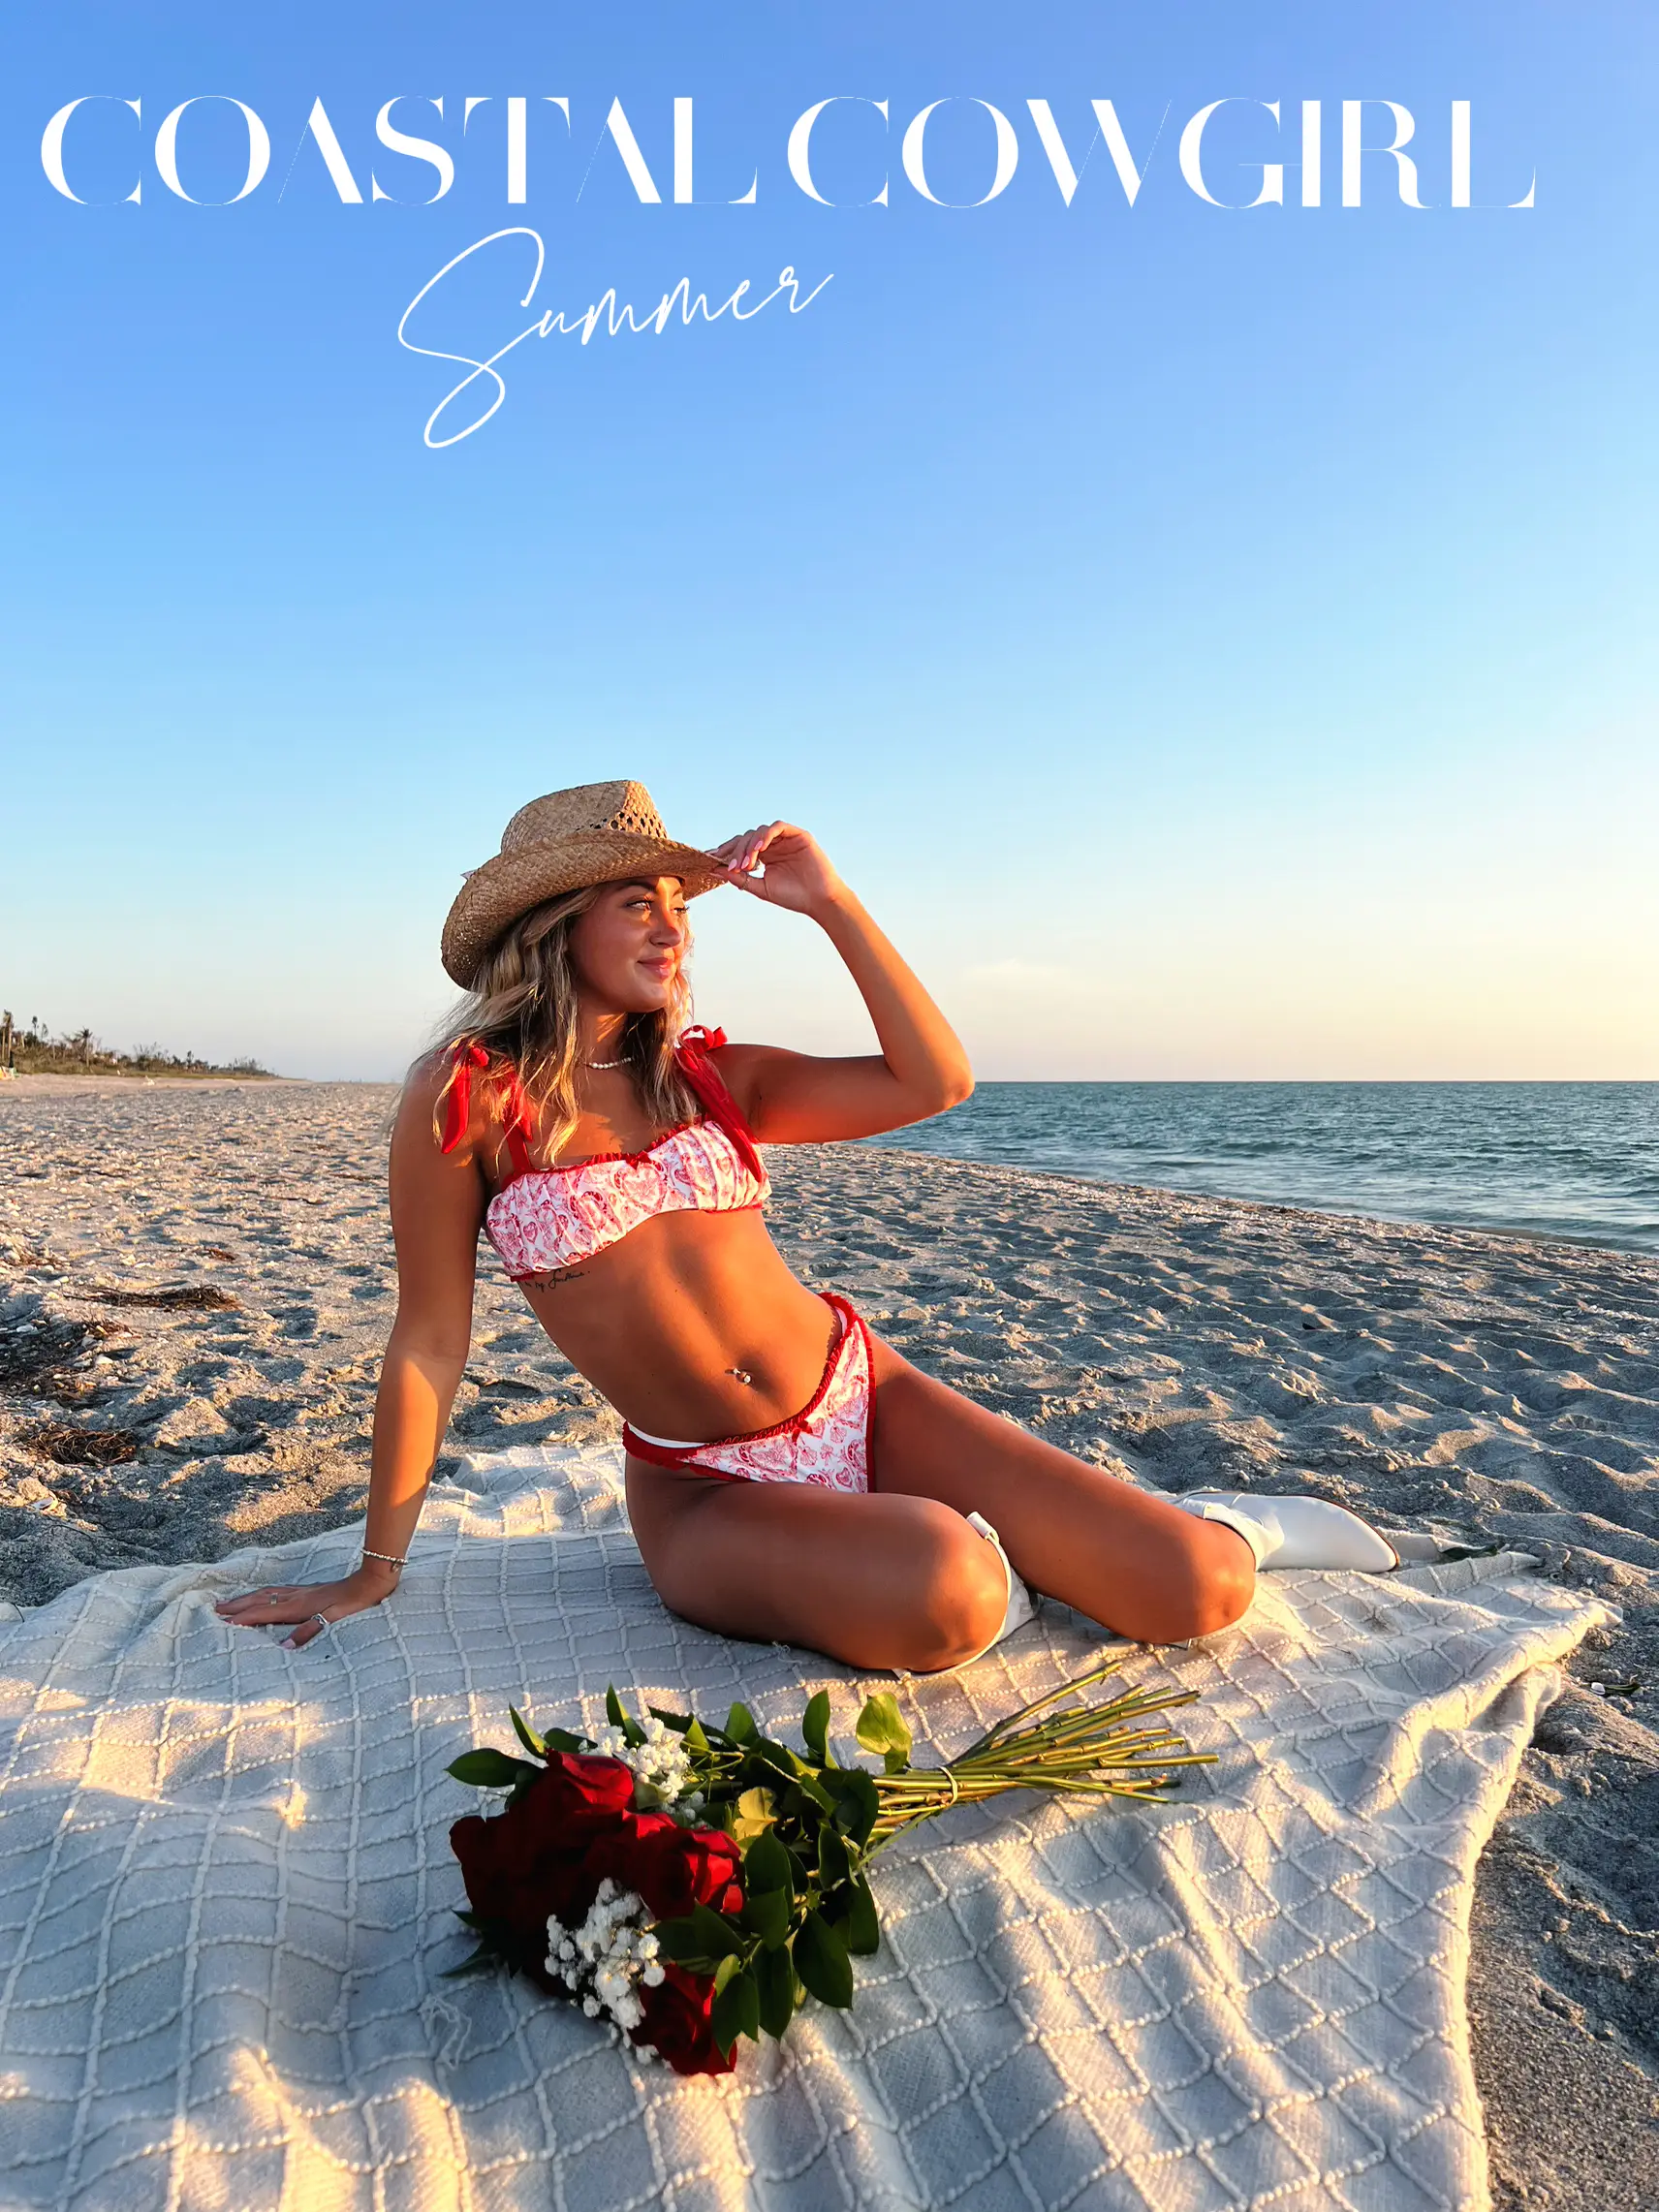 COASTAL COWGIRL SUMMER🤠💋✨🌹's images